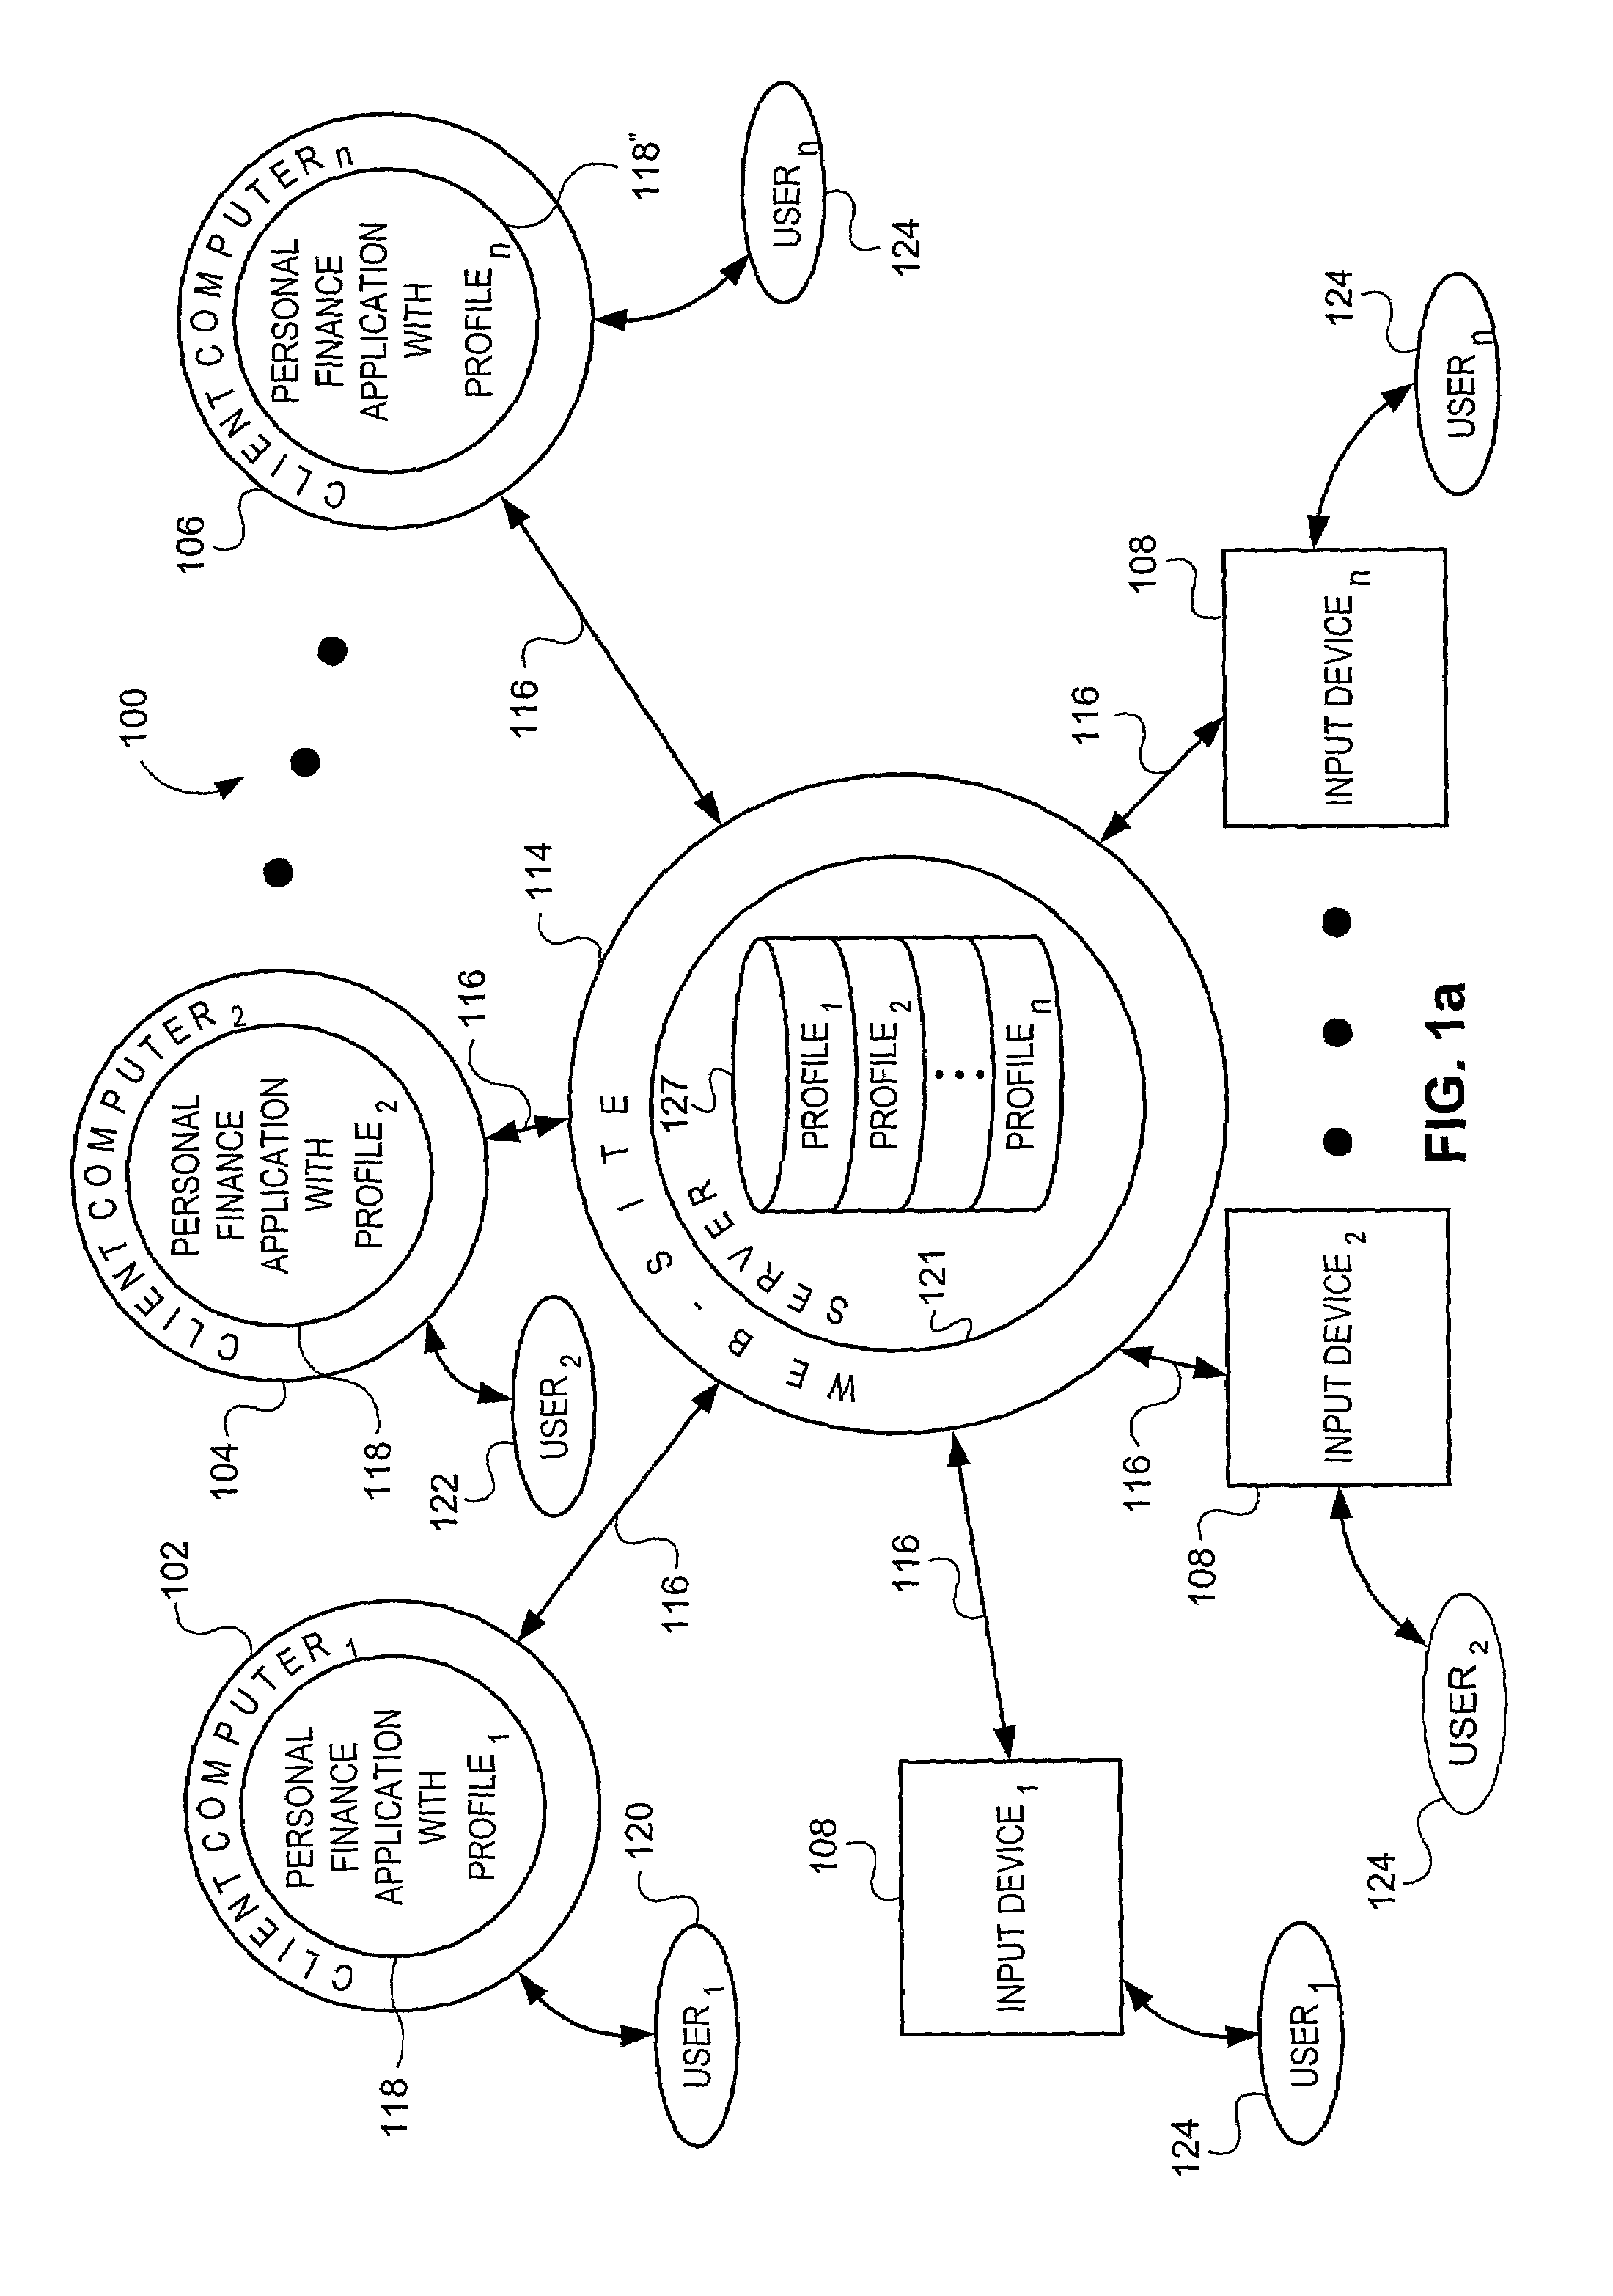 Web-based entry of financial transaction information and subsequent download of such information